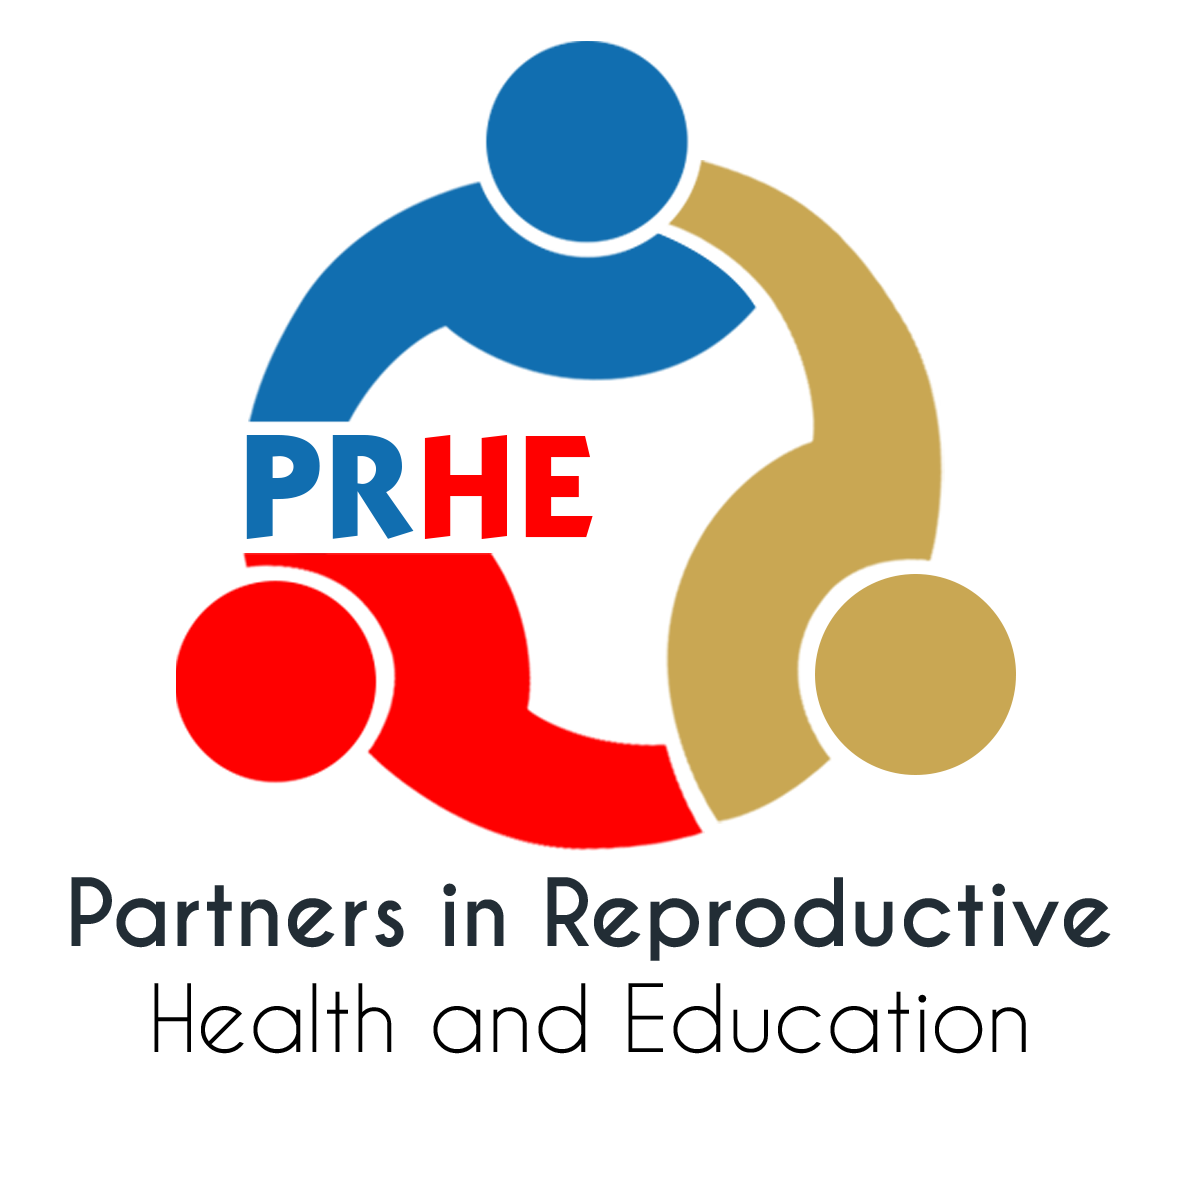 Partners in Reproductive Health and Education